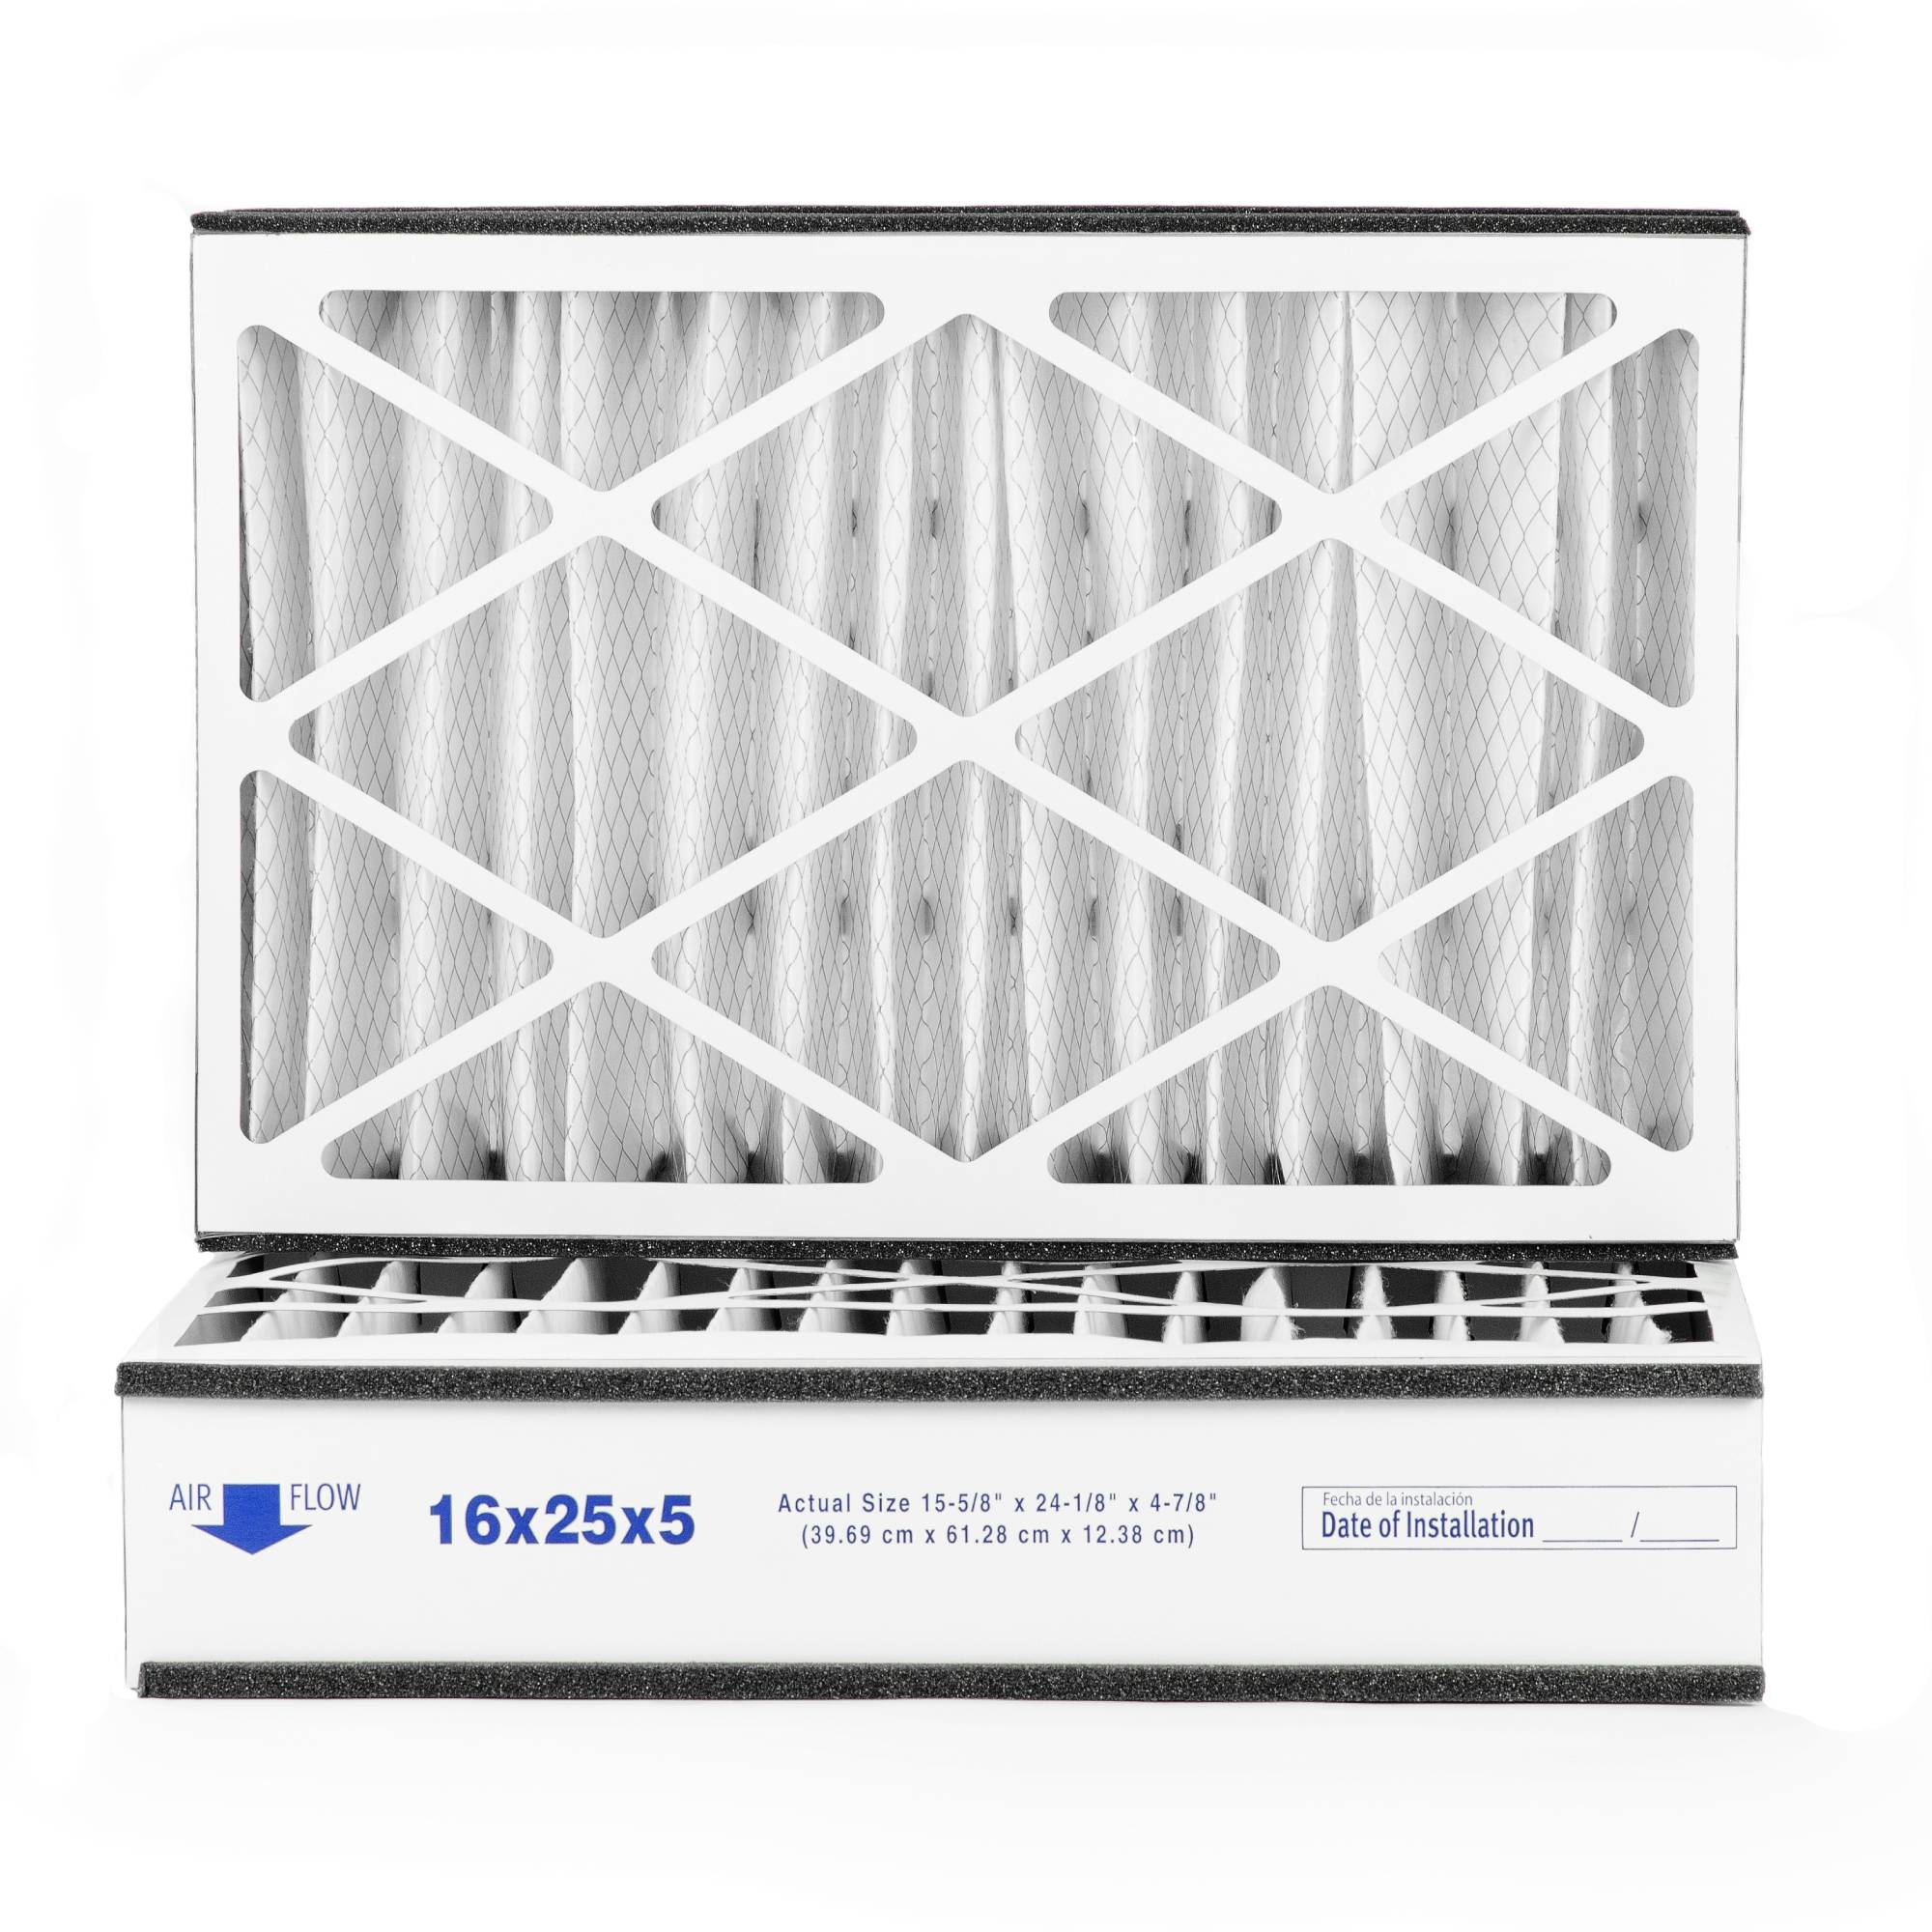 Filters Fast® Replacement for Skuttle 000-0448-001, DB-25-16 16x25x5 MERV 8 Furnace & AC Air Filter - 2-Pack